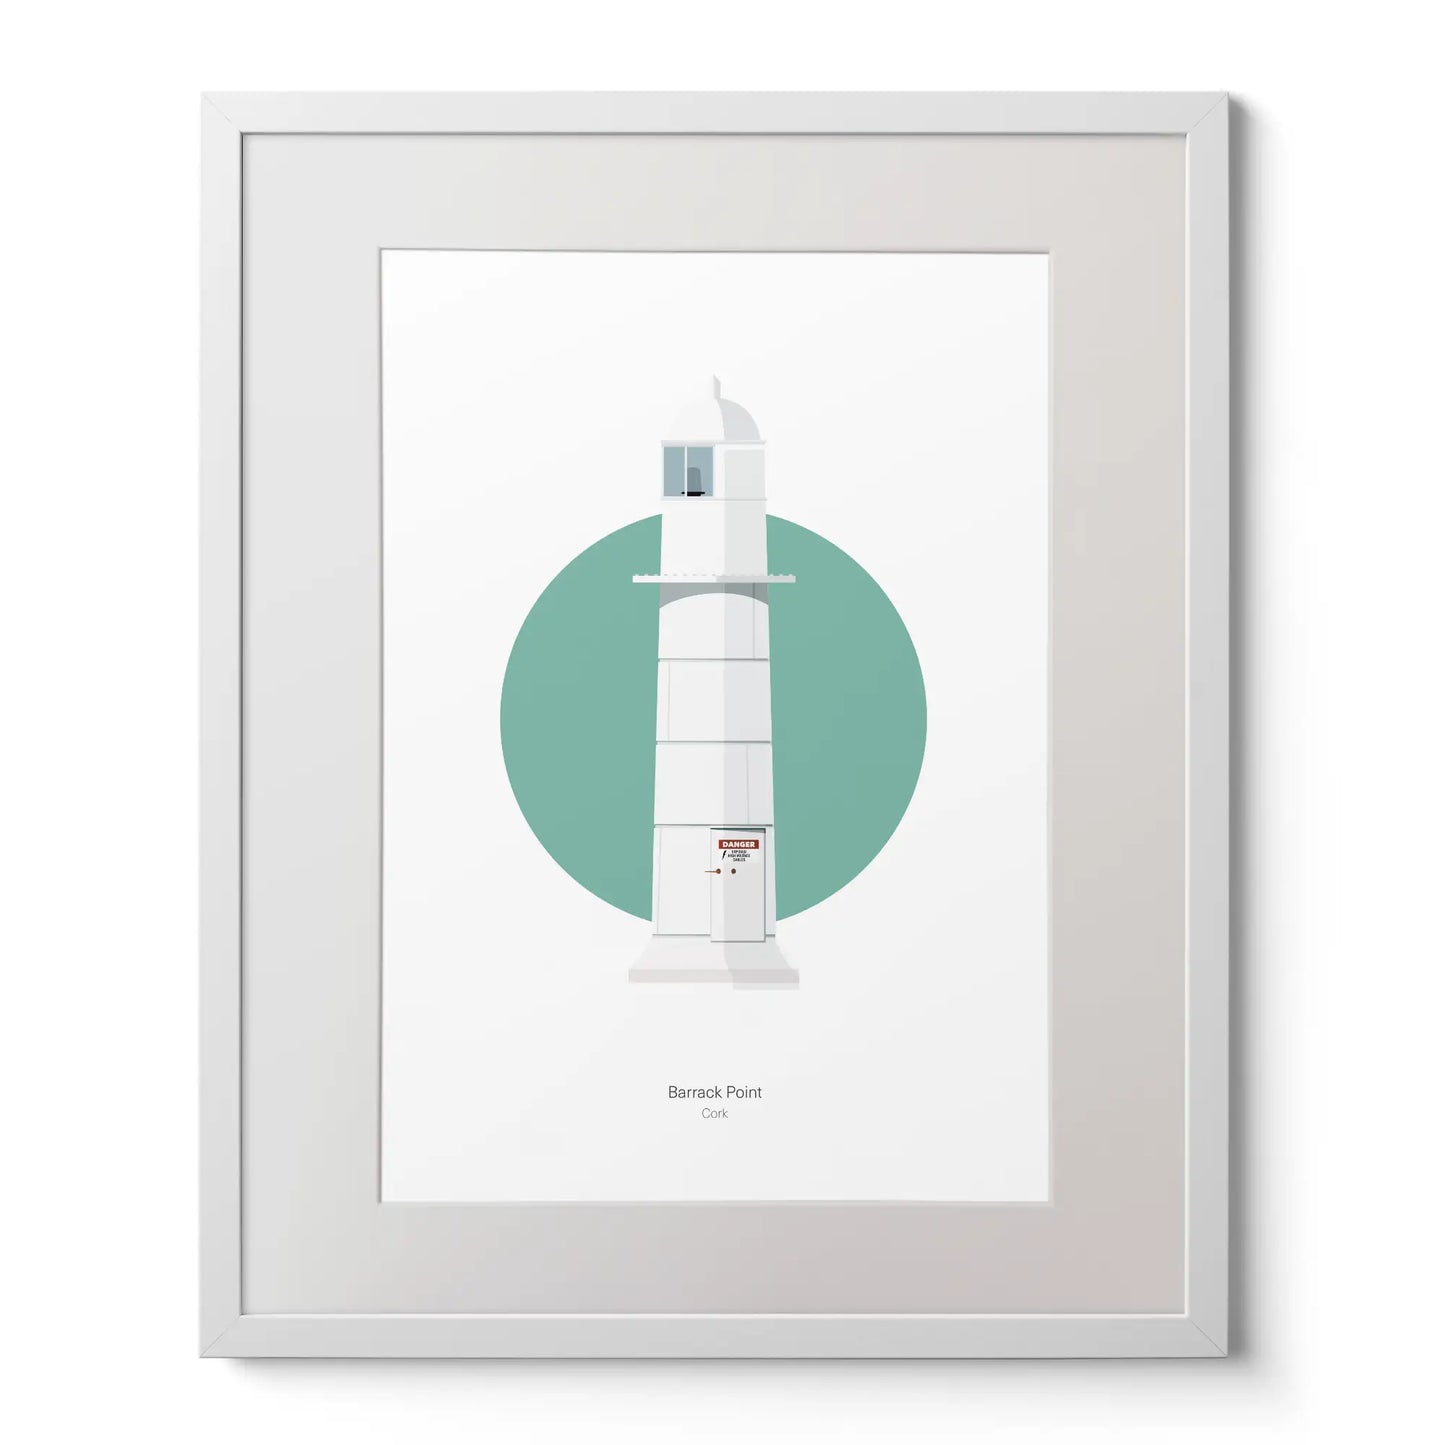 Contemporary art print of Barrack Point lighthouse on a white background inside light blue square,  in a white frame measuring 40x50cm.